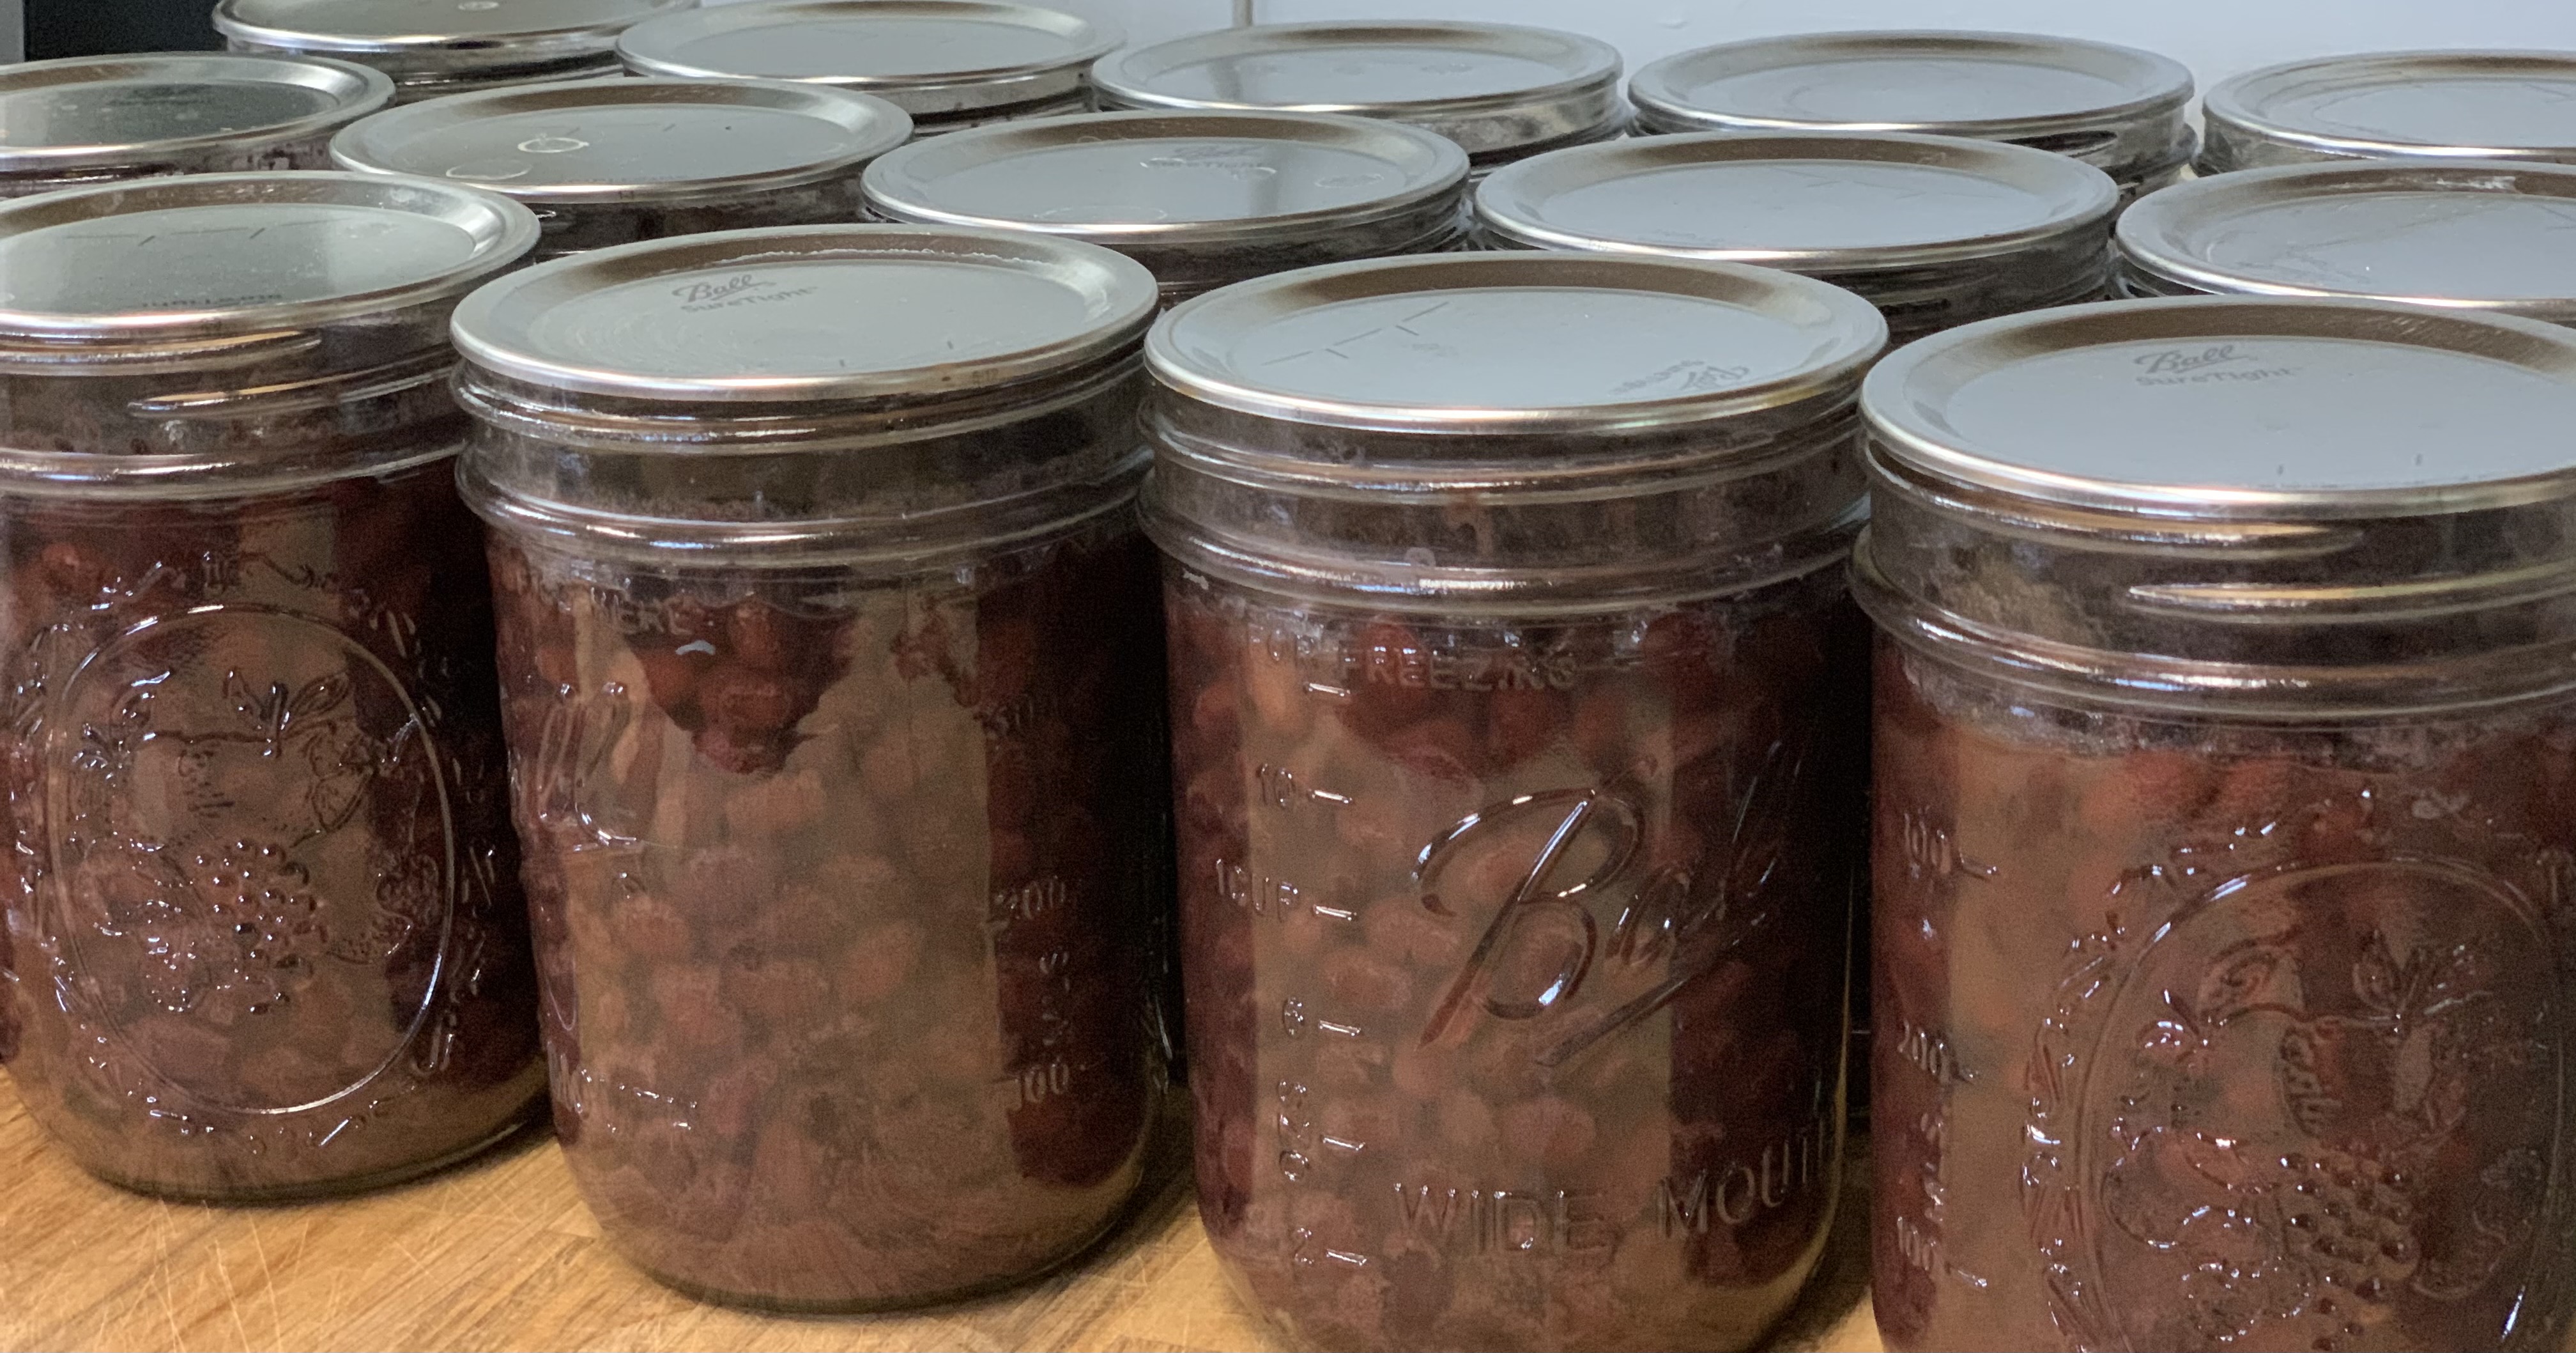 Pint sized jars of canned black beans